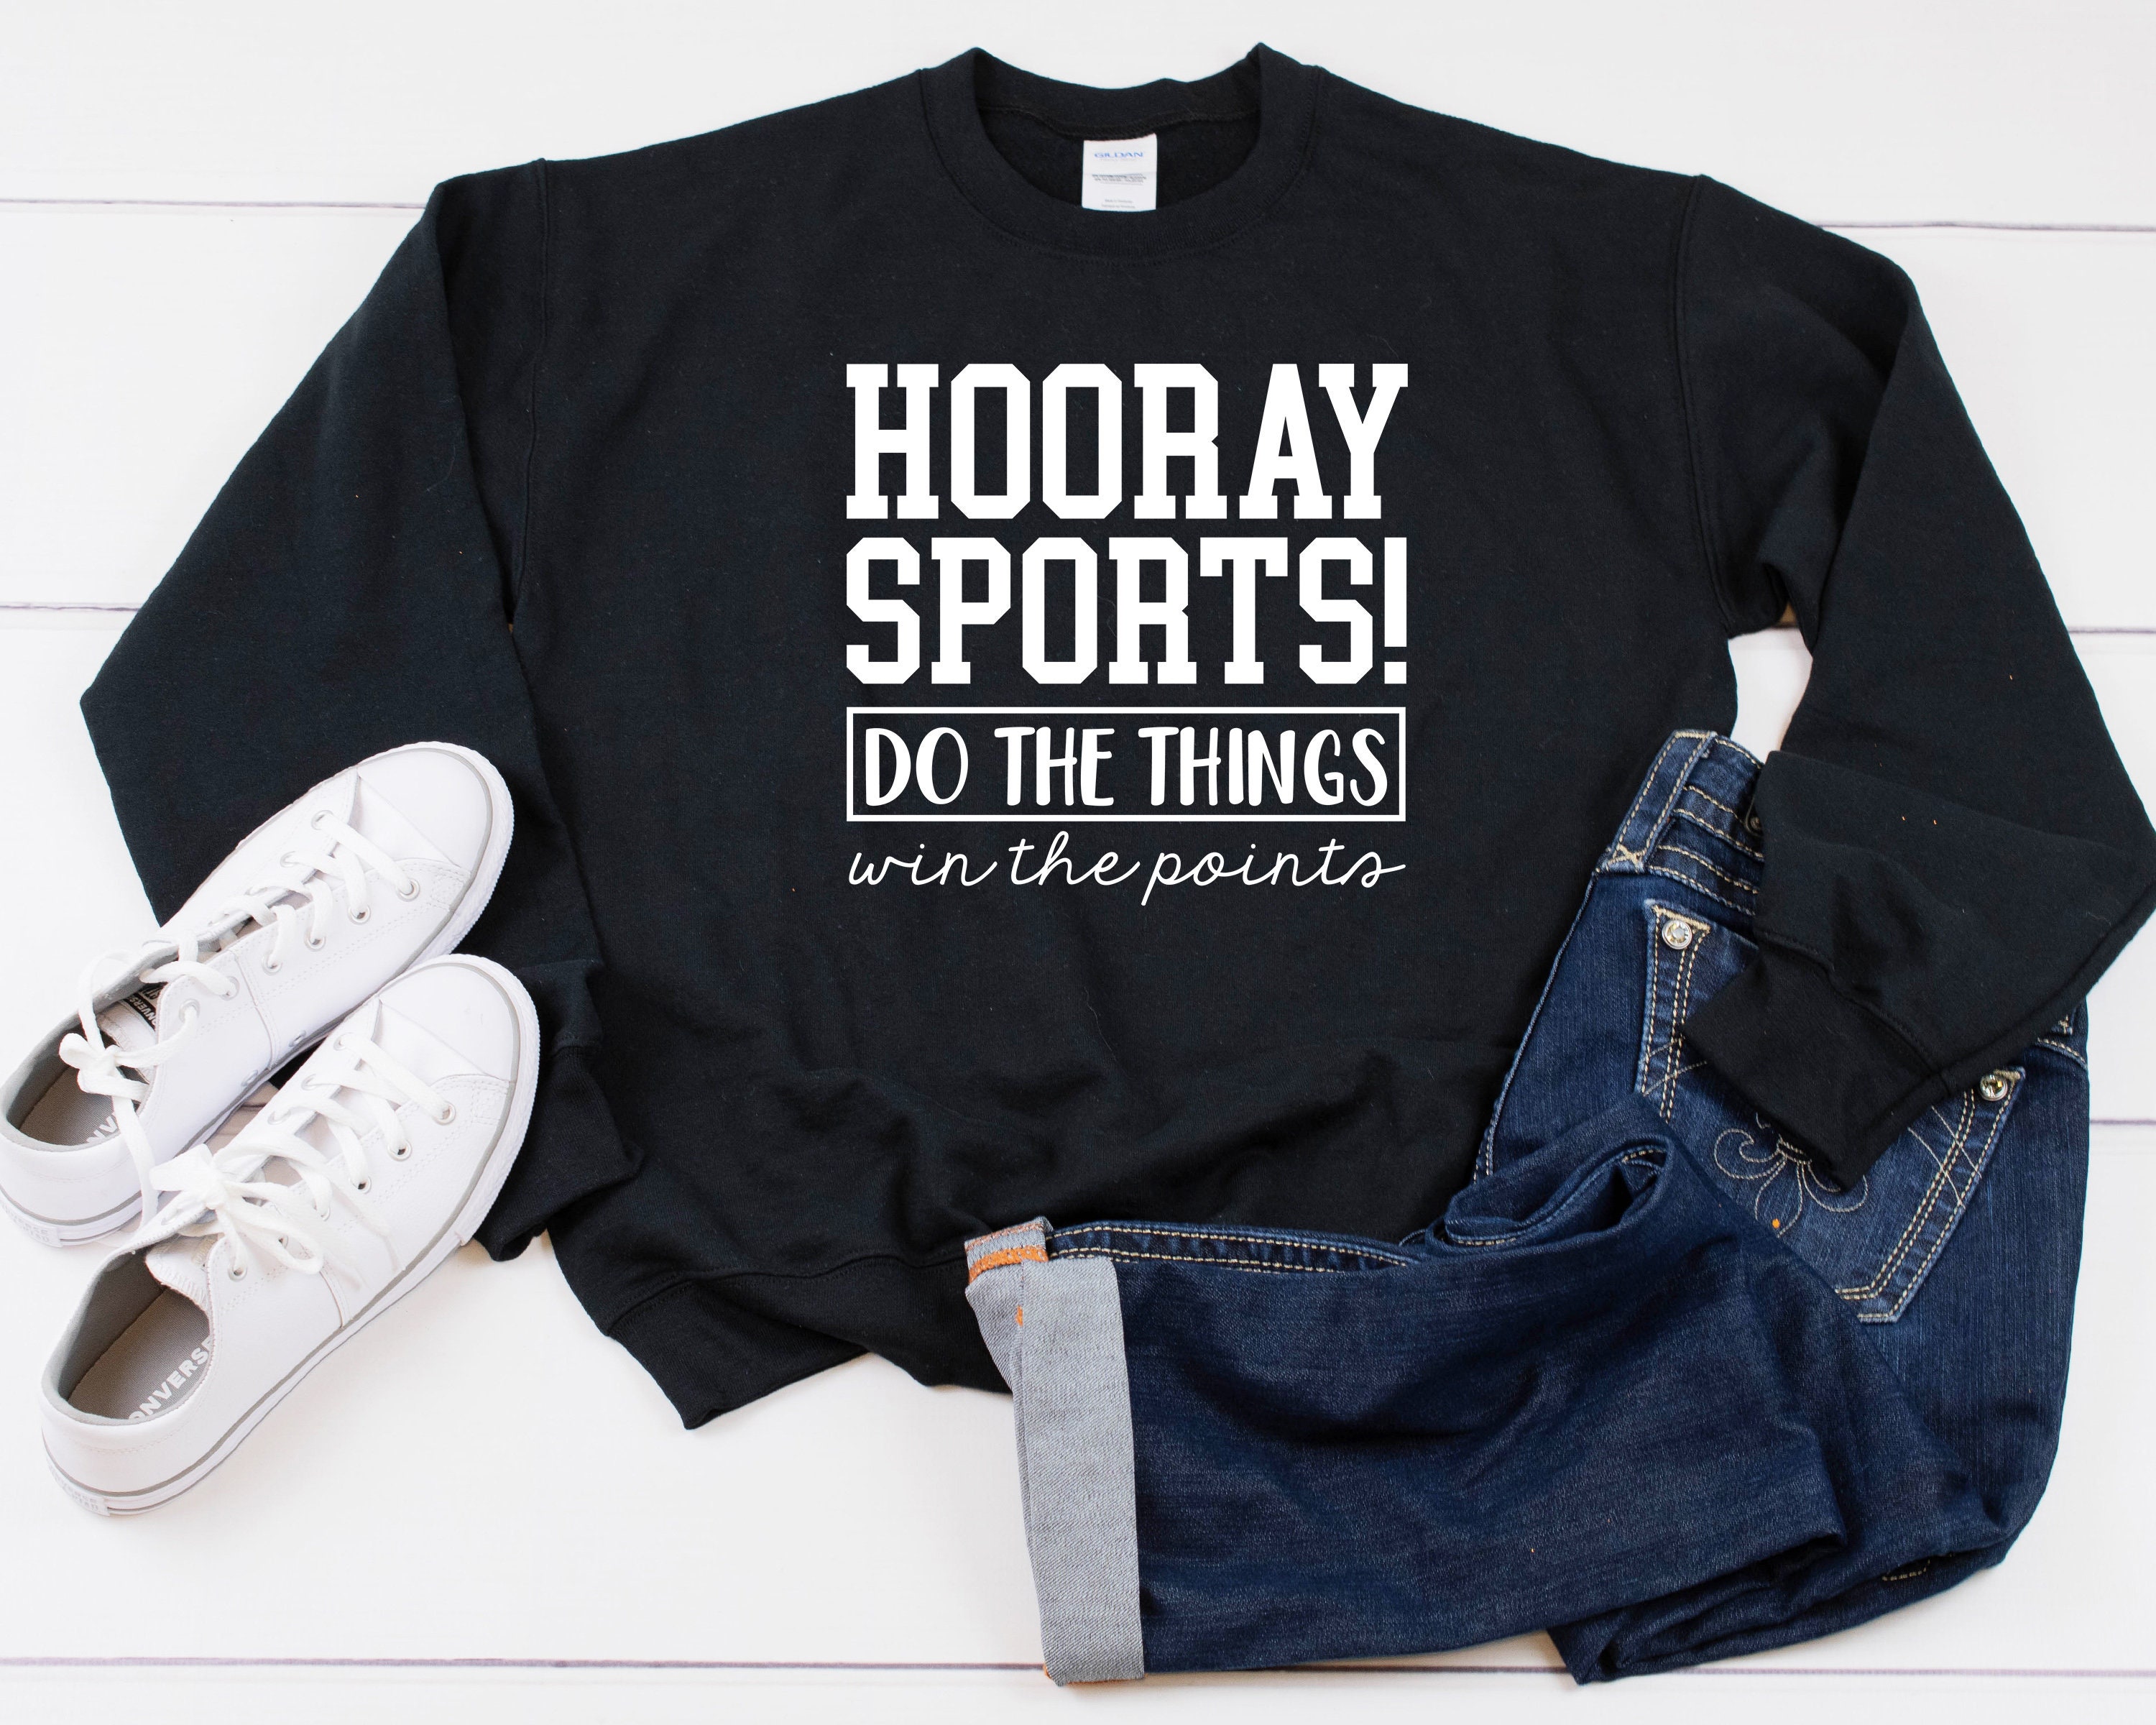 Hooray Sports Heavy Blend Crewneck Sweatshirt, Game Day Sweater, Funny Football Gameday Gameday, 24 Colors